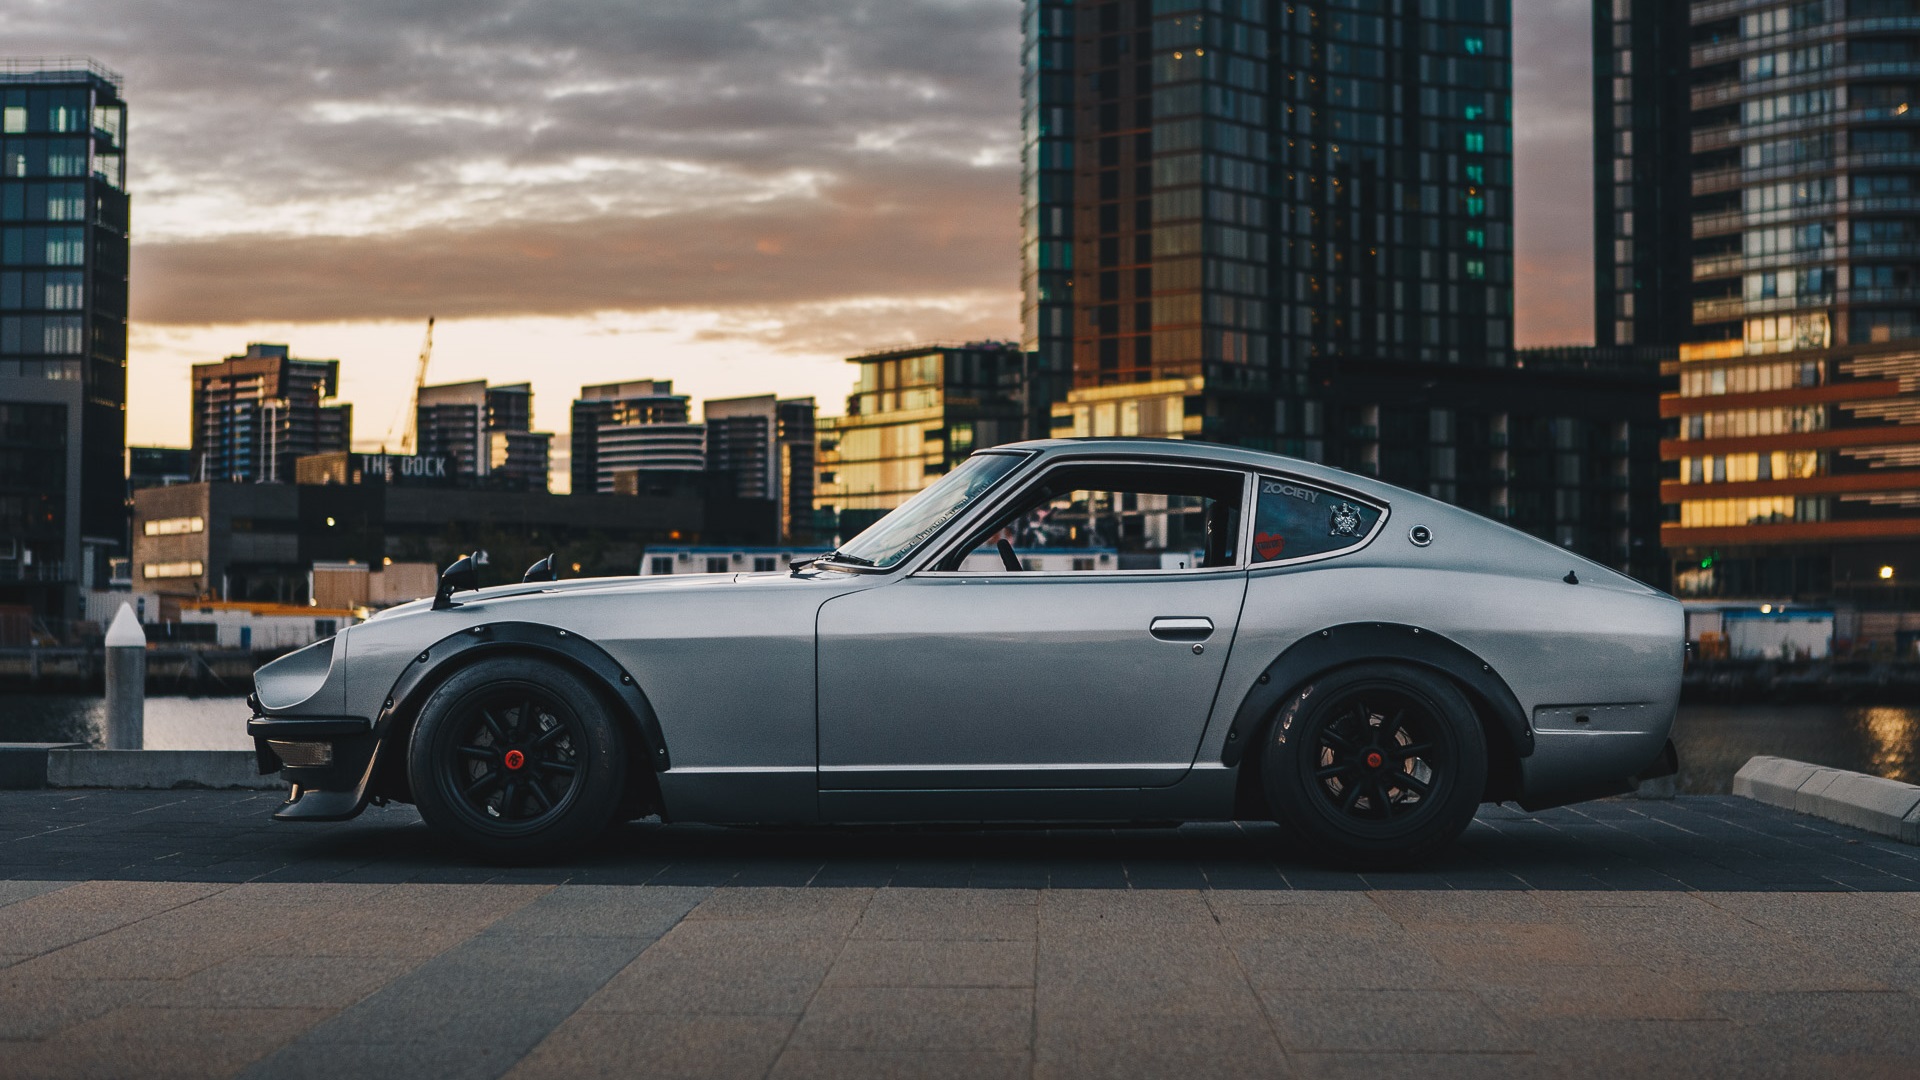 General 1920x1080 Nissan S30 Nissan Fairlady Z Japanese cars sports car Nissan city silver cars car vehicle skyscraper bolt-on fender flares side view gray cars outdoors